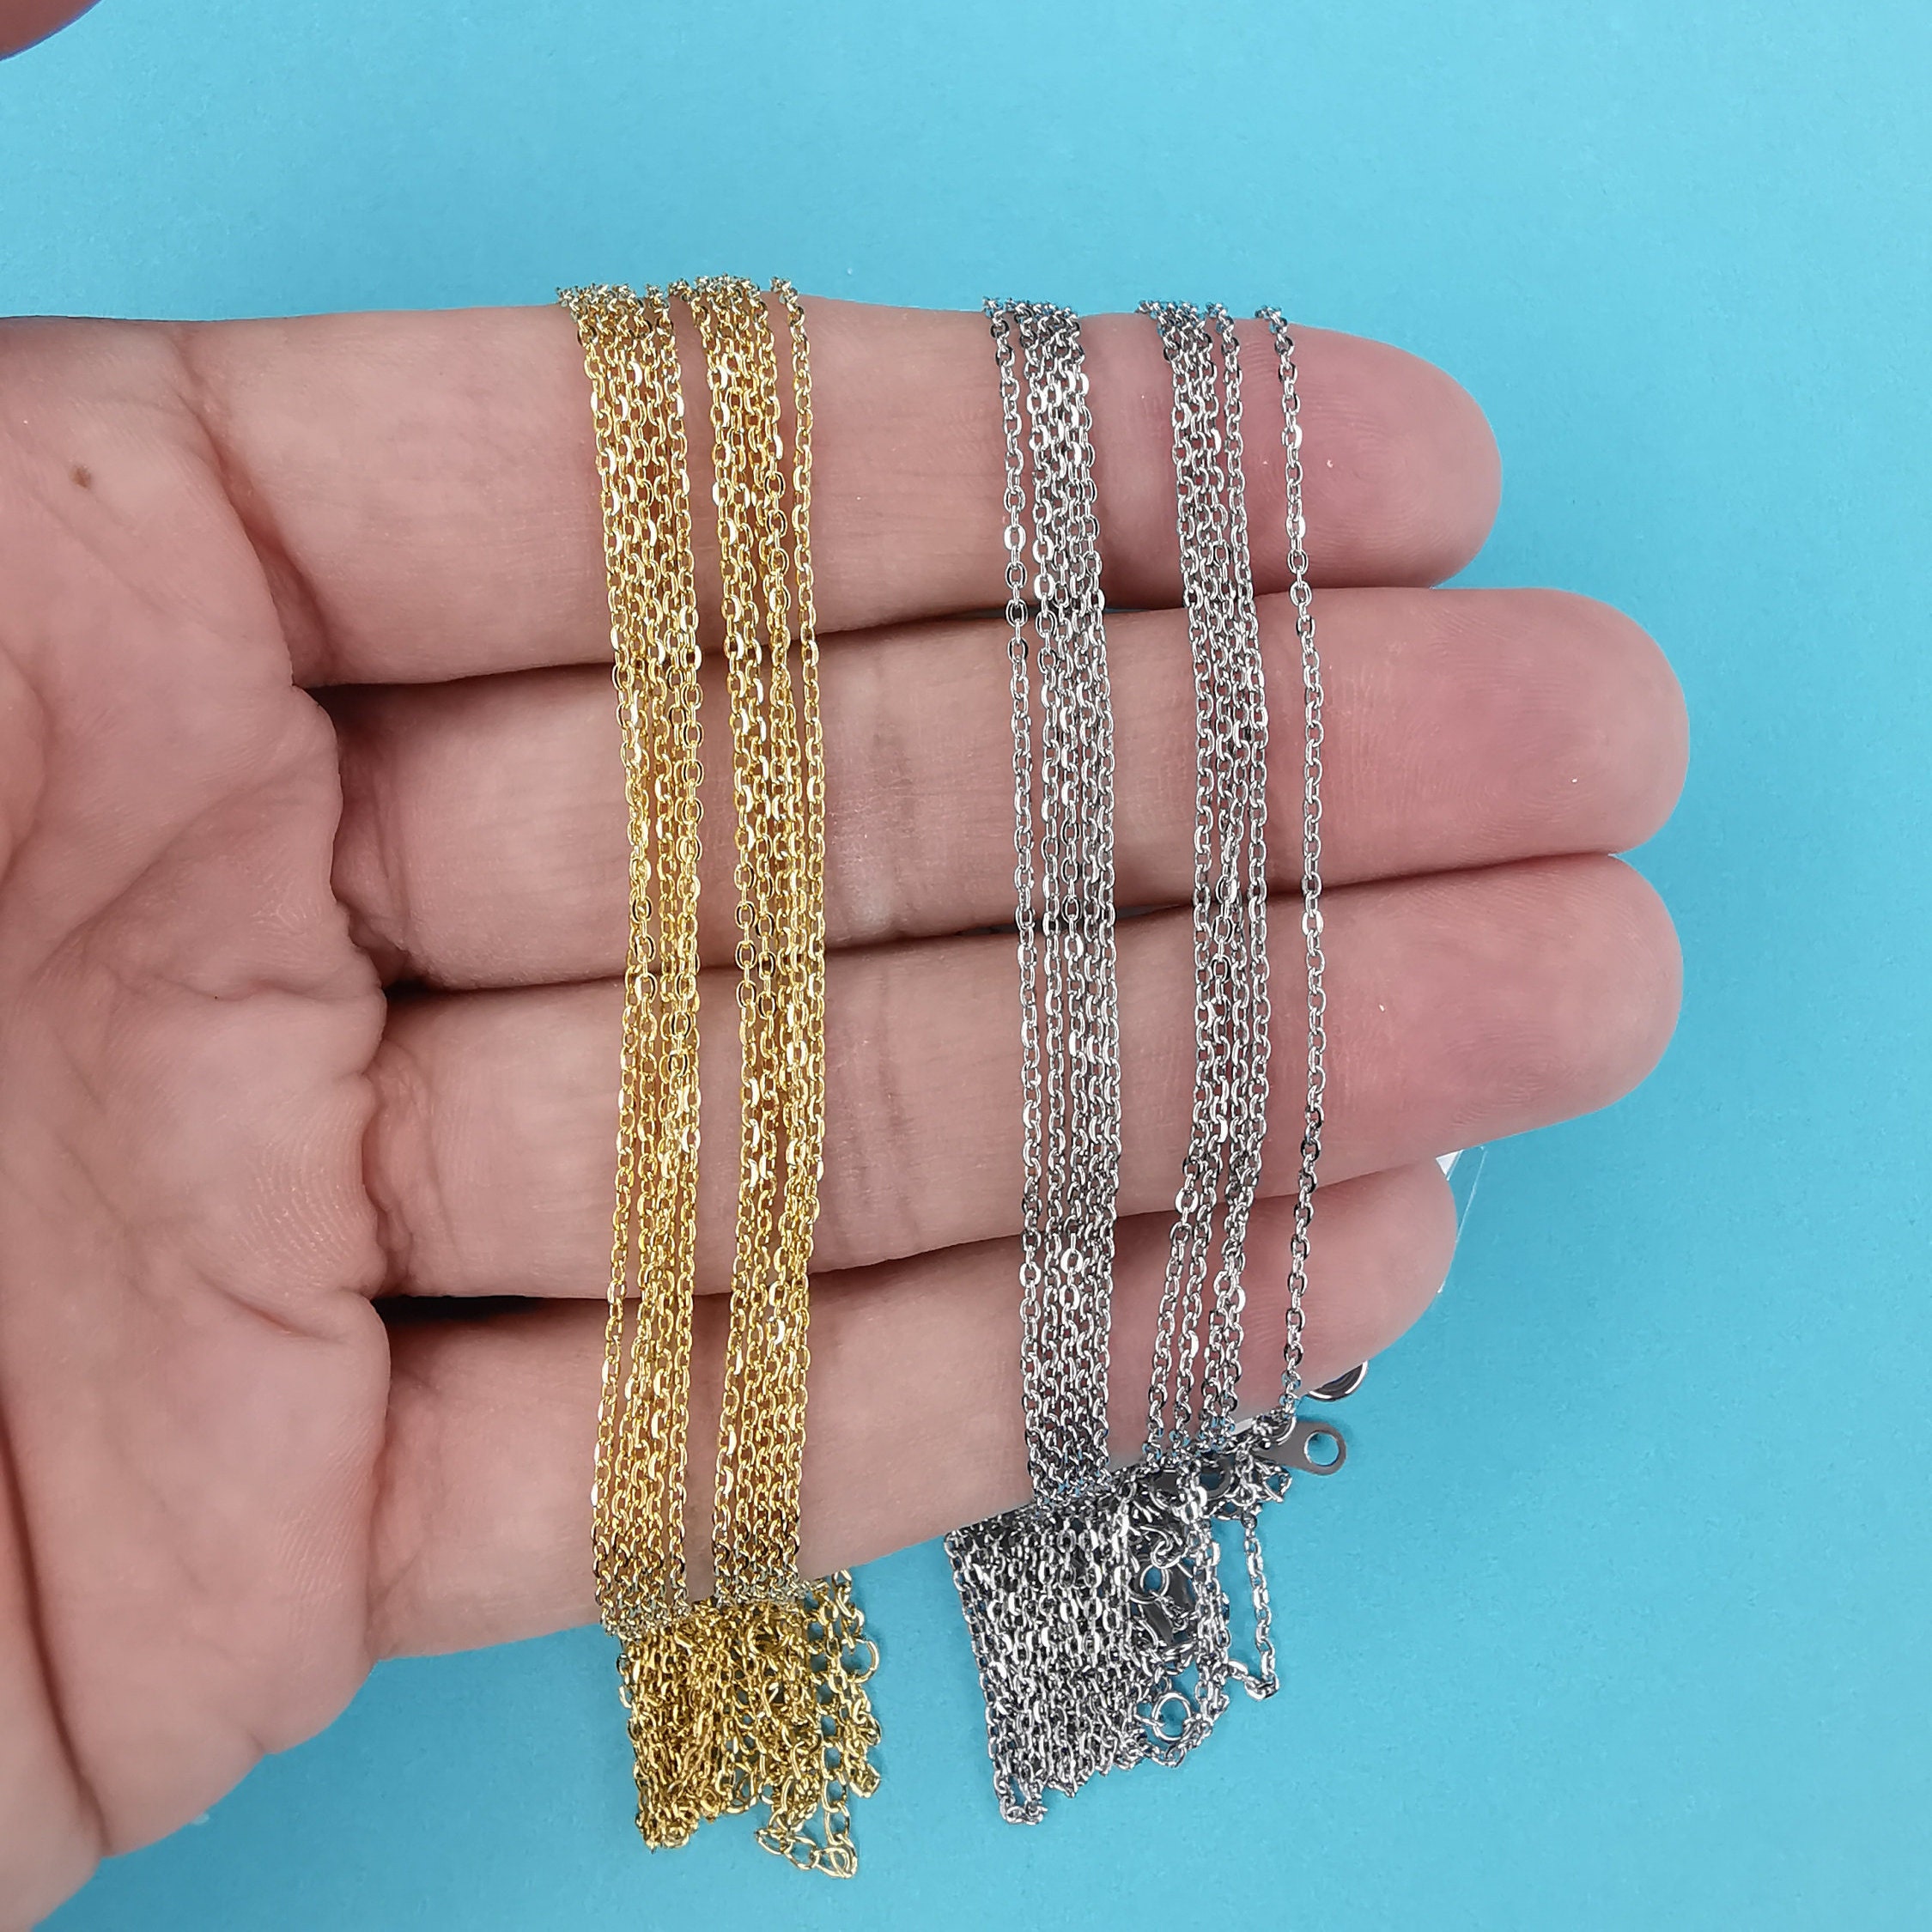 Wholesale 5pcs Finished 316L Stainless Steel Chain, 18k Gold Plated, Necklace  Chains Bulk for Jewelry Making, Hypoallergenic Chain 